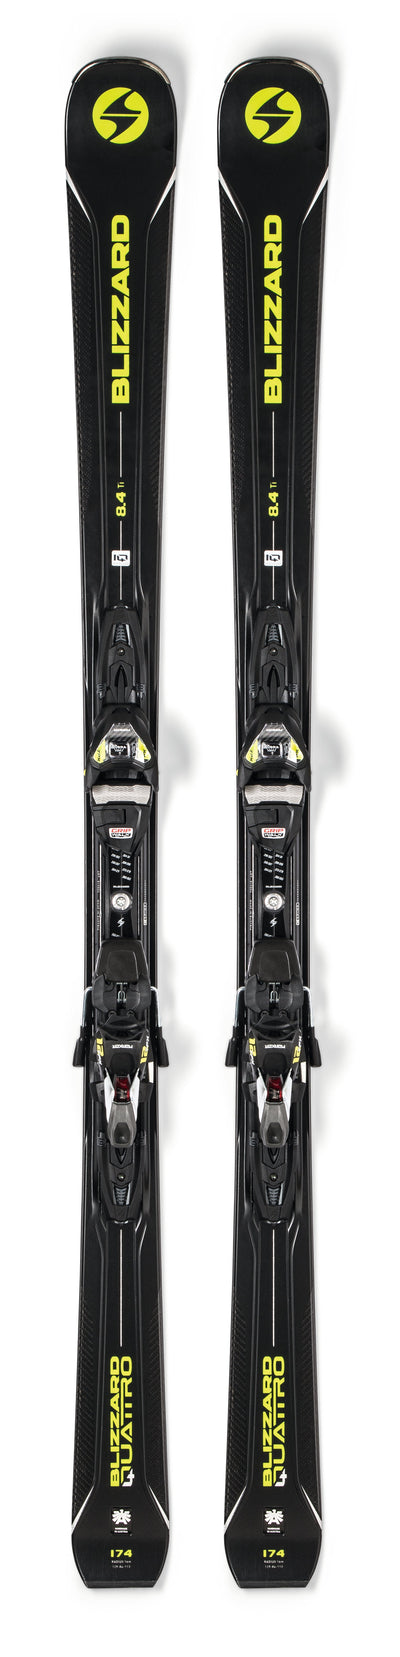 2019 Blizzard Quattro 8.4 Ti Snow Skis with Marker Bindings